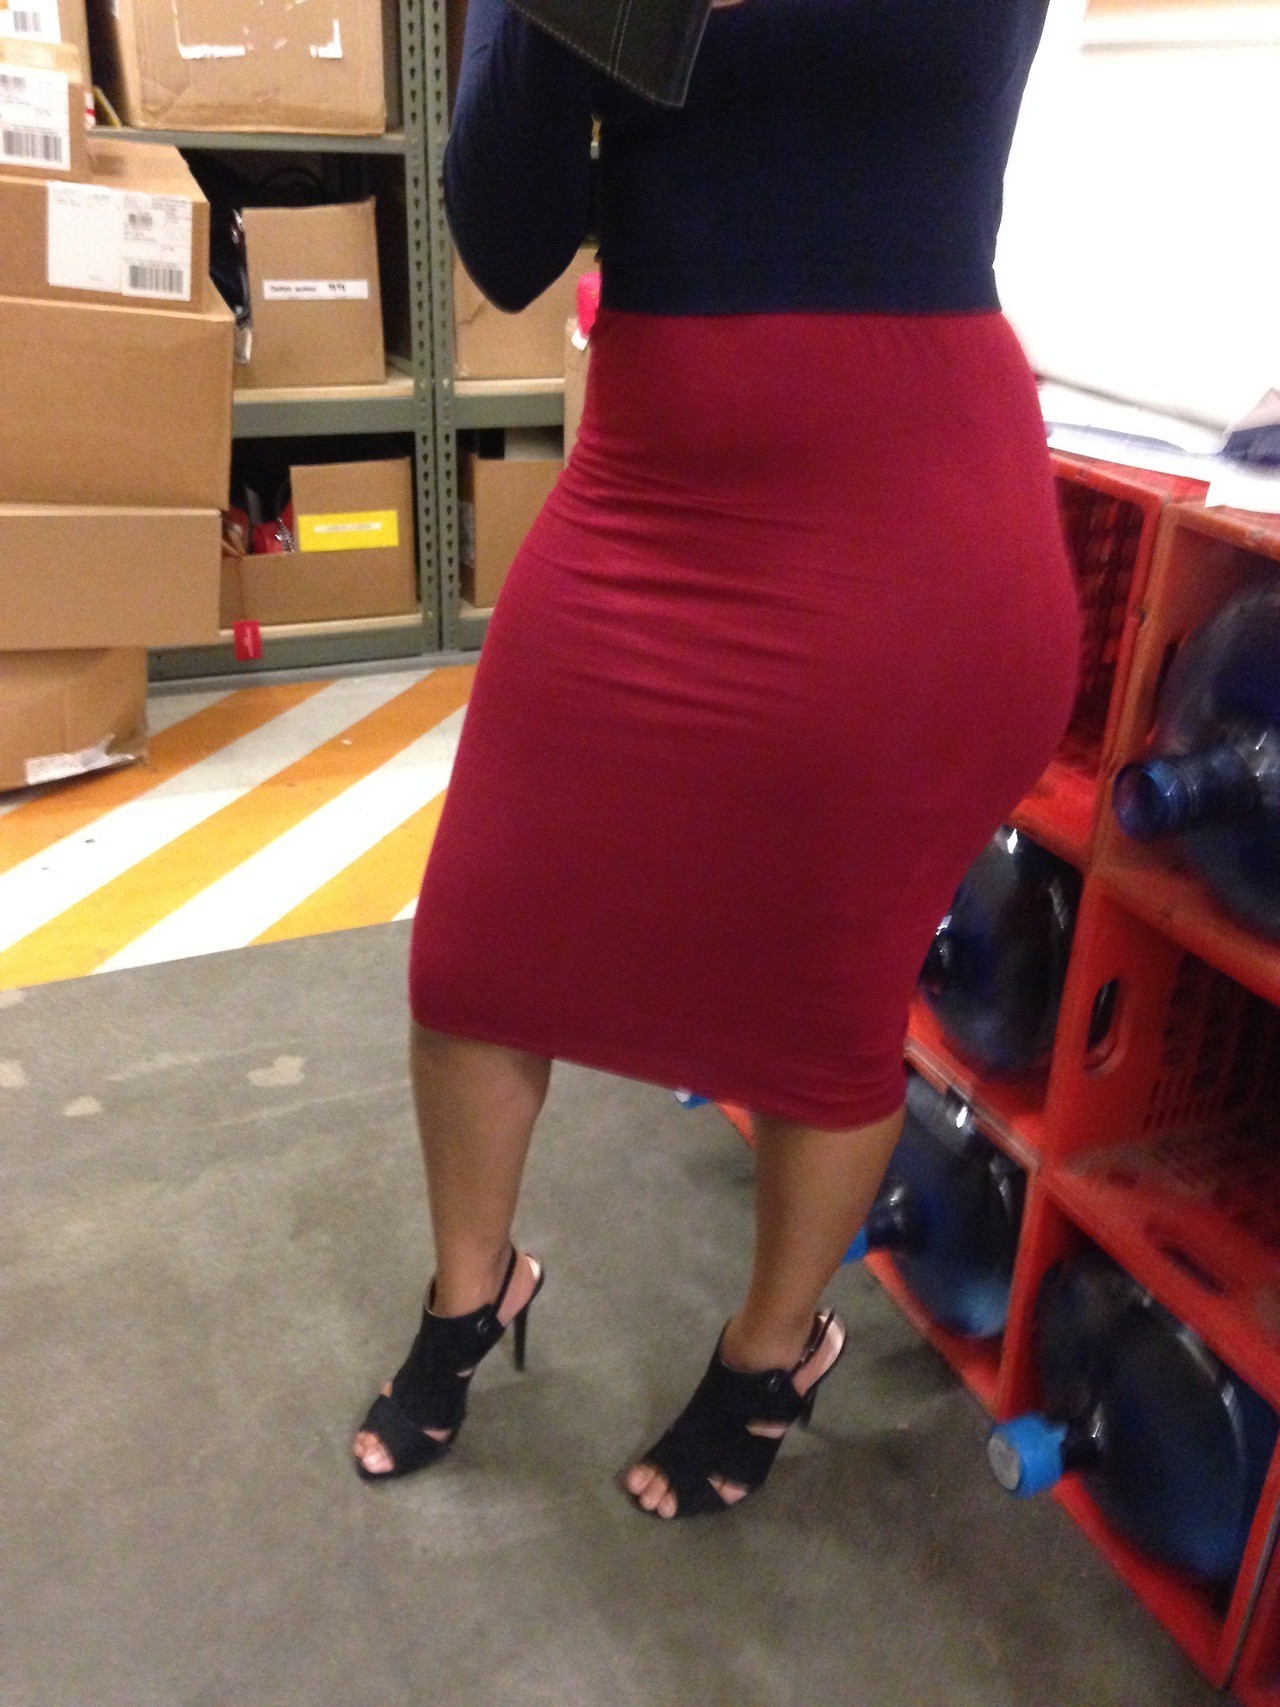 Amazing Phat Booty Coworker